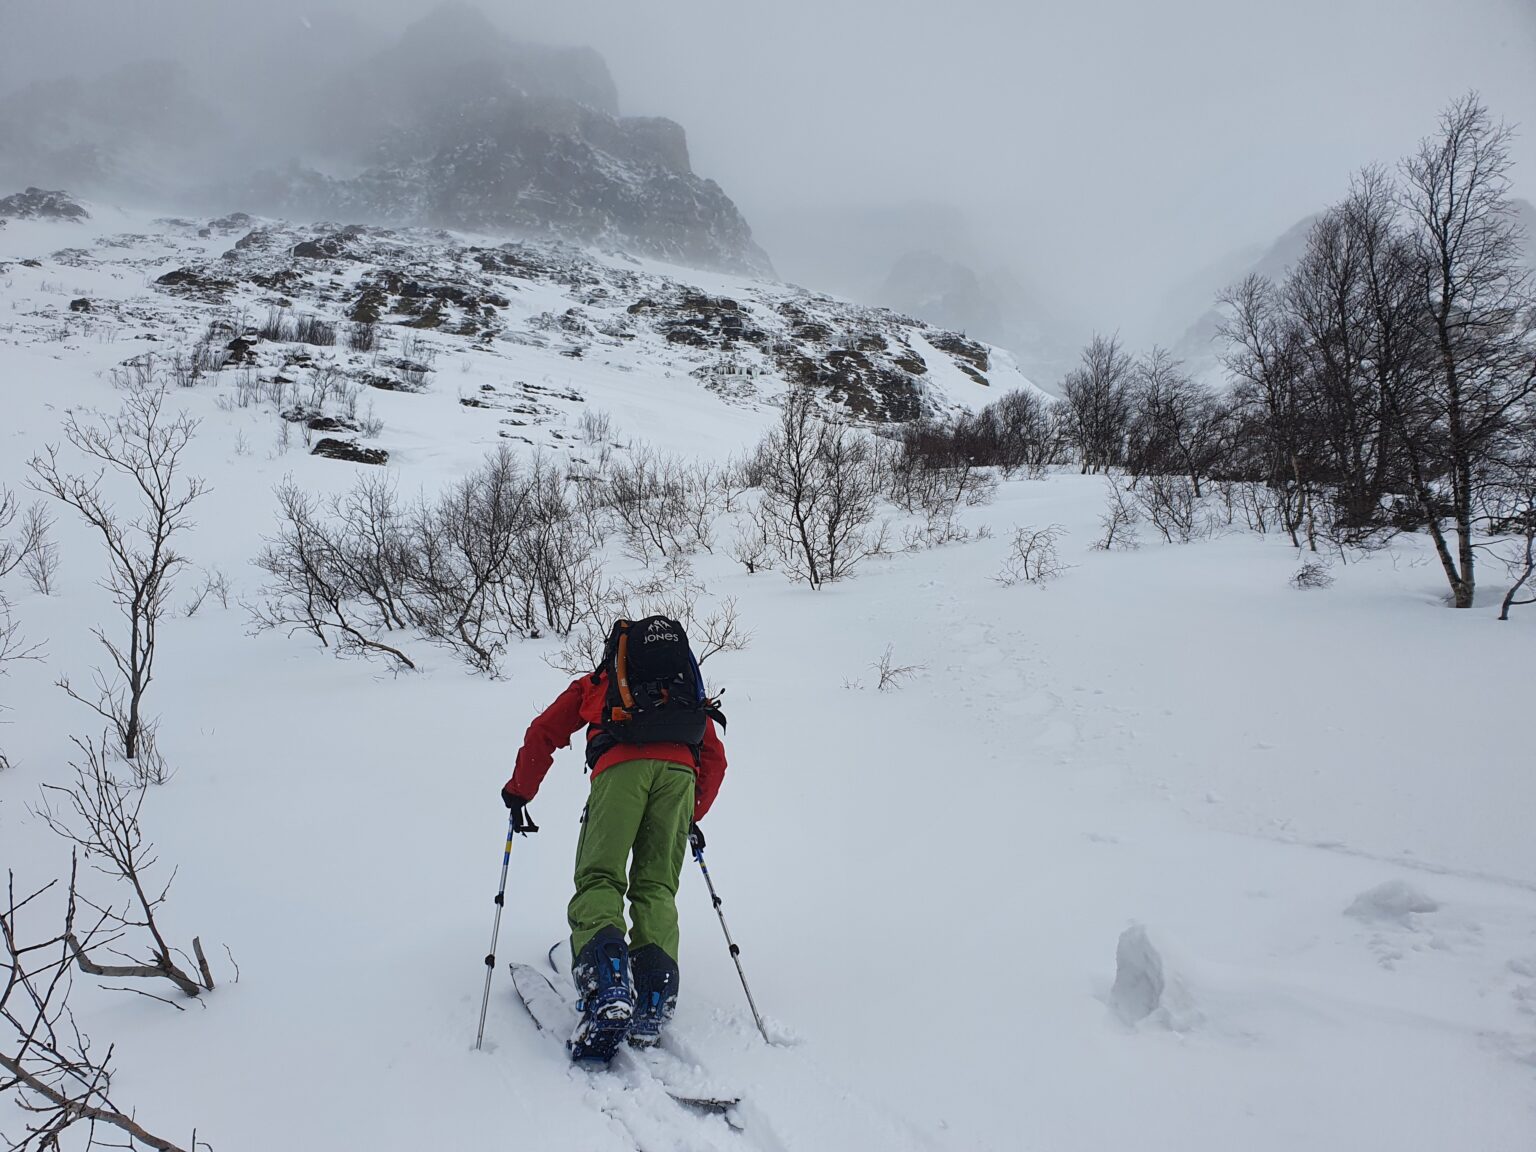 Heading up to the upper cliff bands on the west slope of Rostafjellet